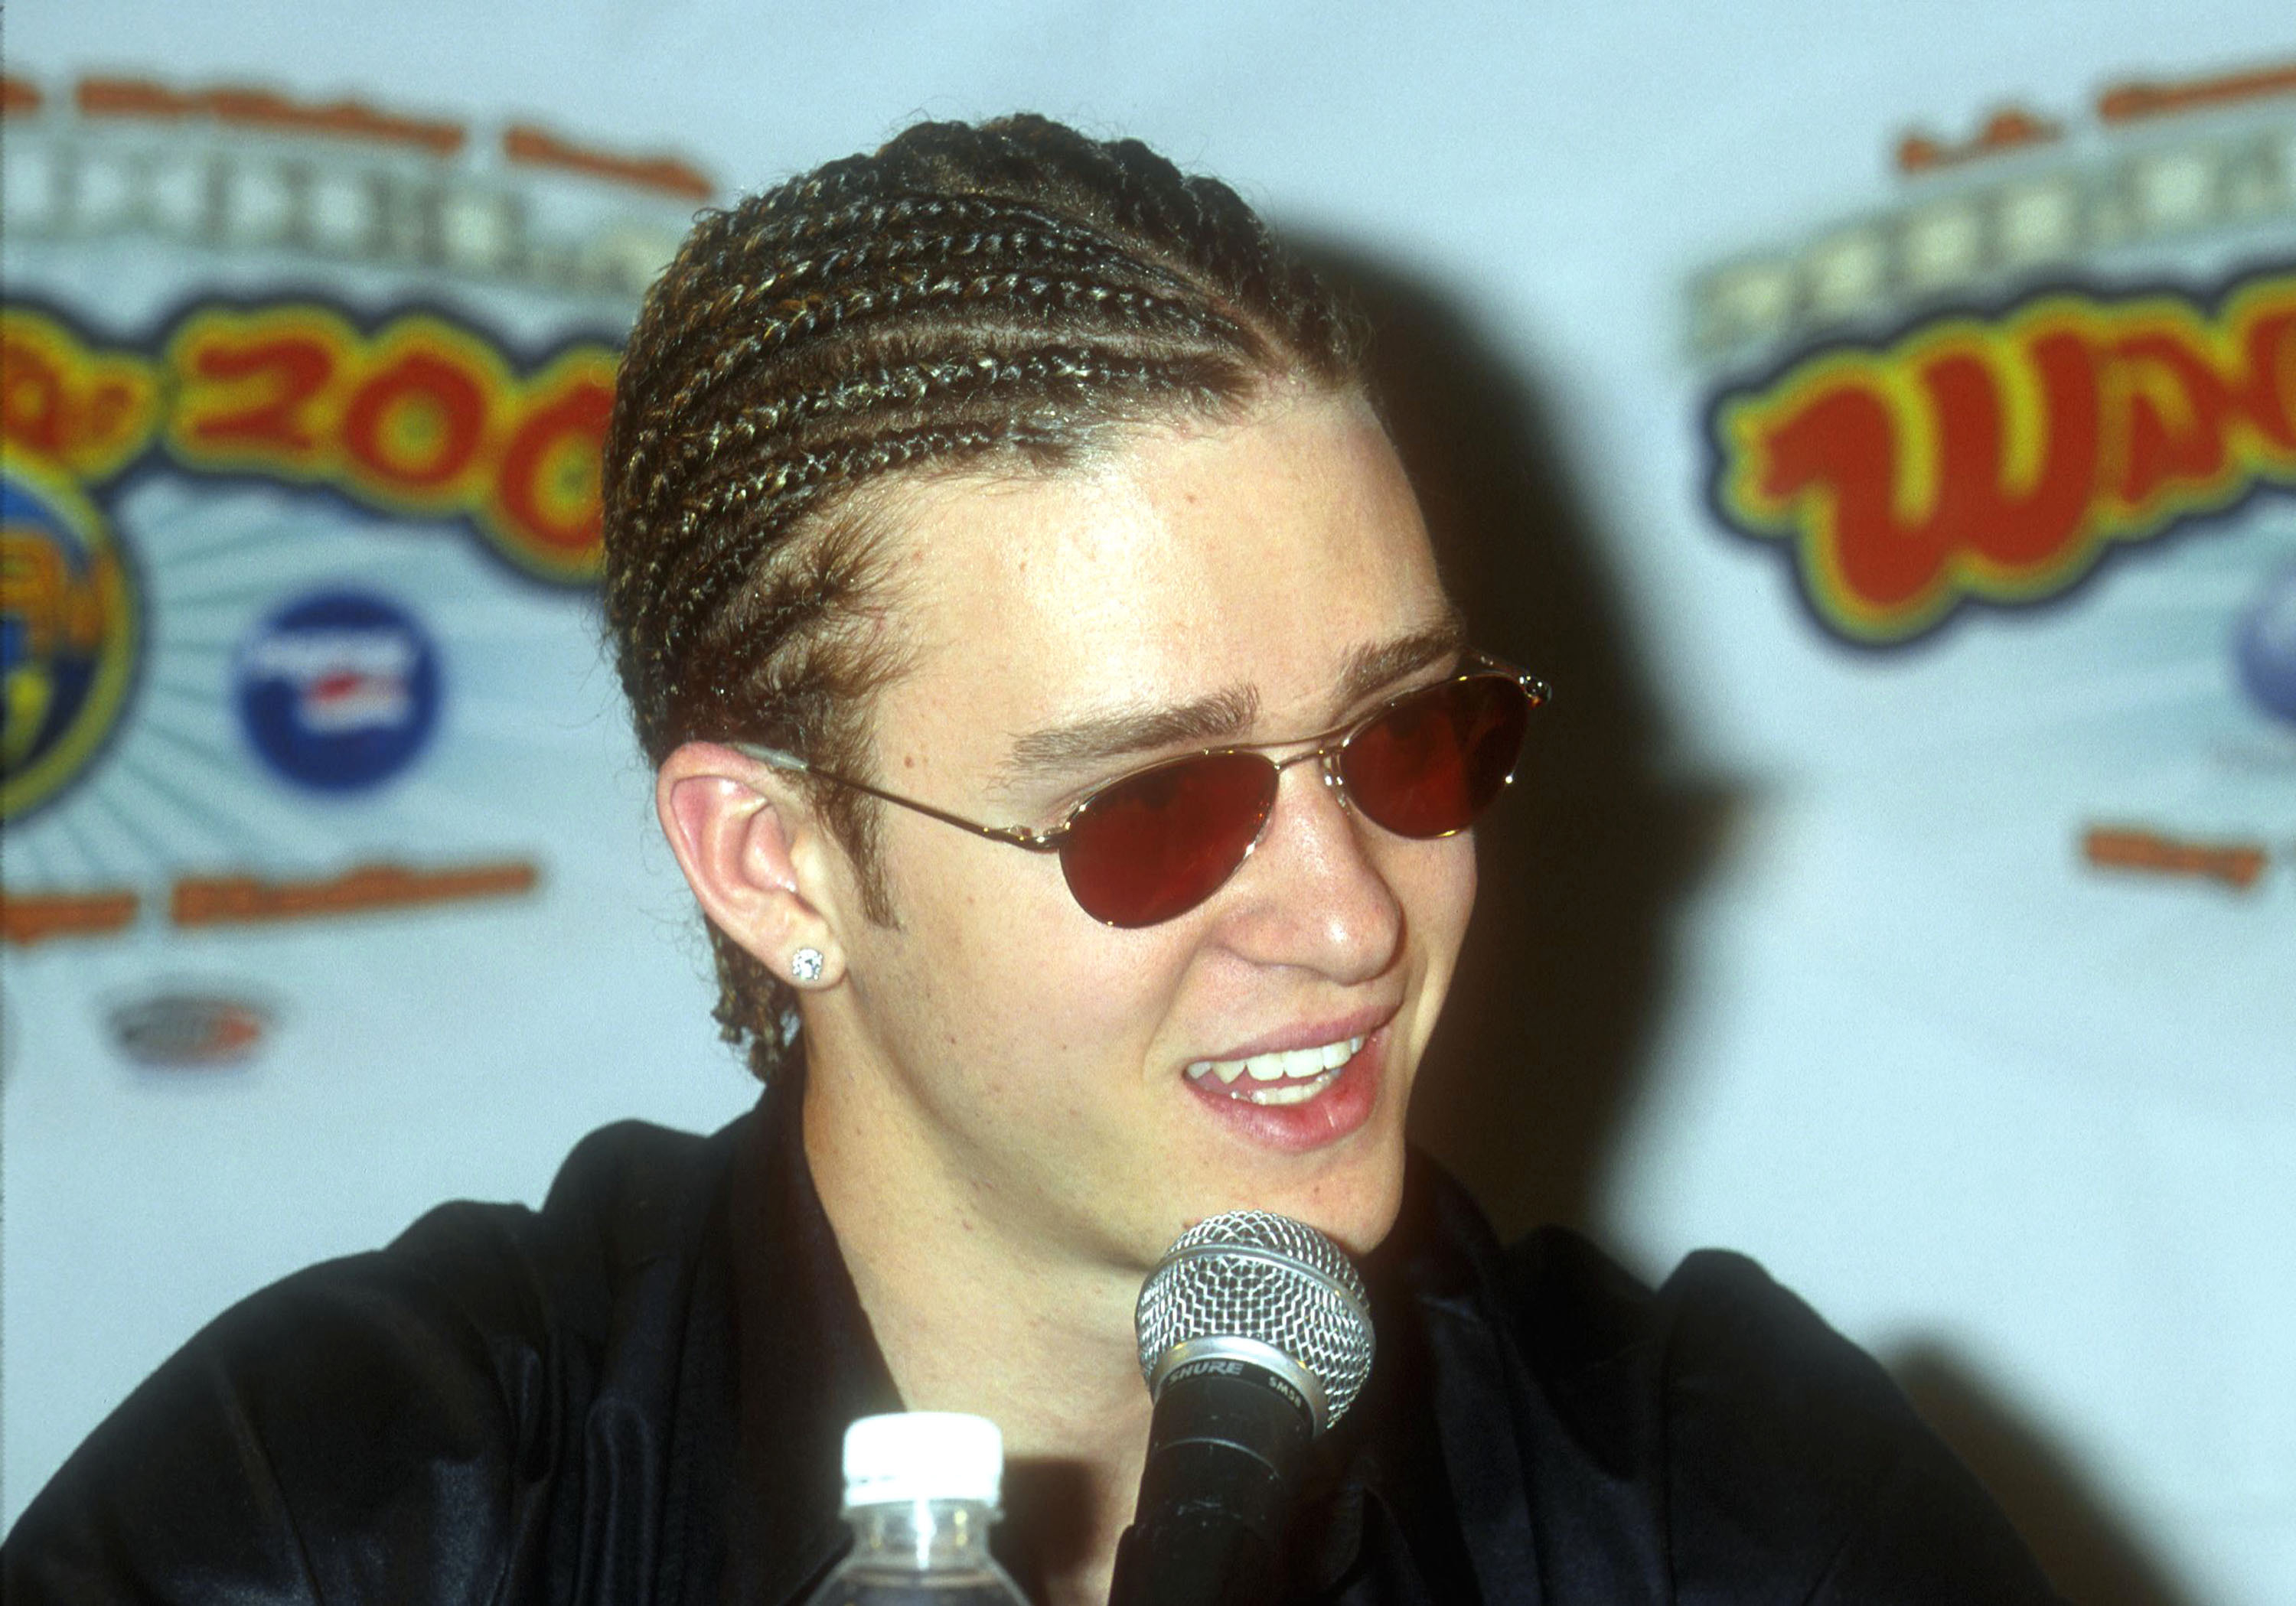 A closeup of Justin Timberlake with his hair in cornrows while speaking at an event